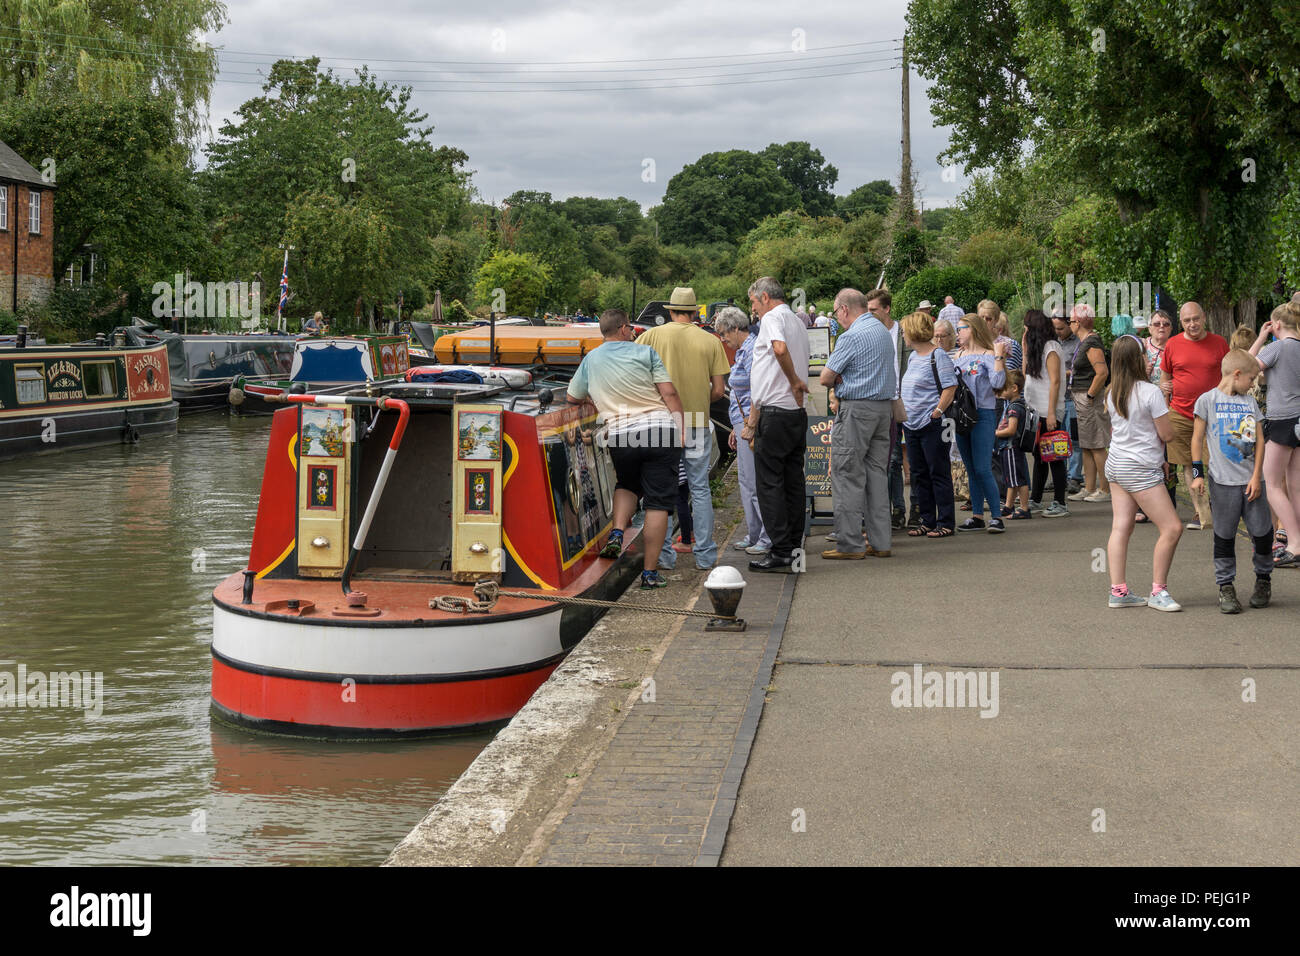 Queue of visitors waiting to board the narrowboat 'Charlie' for a trip on the canal, Stoke Bruerne, Northamptonshire, UK Stock Photo